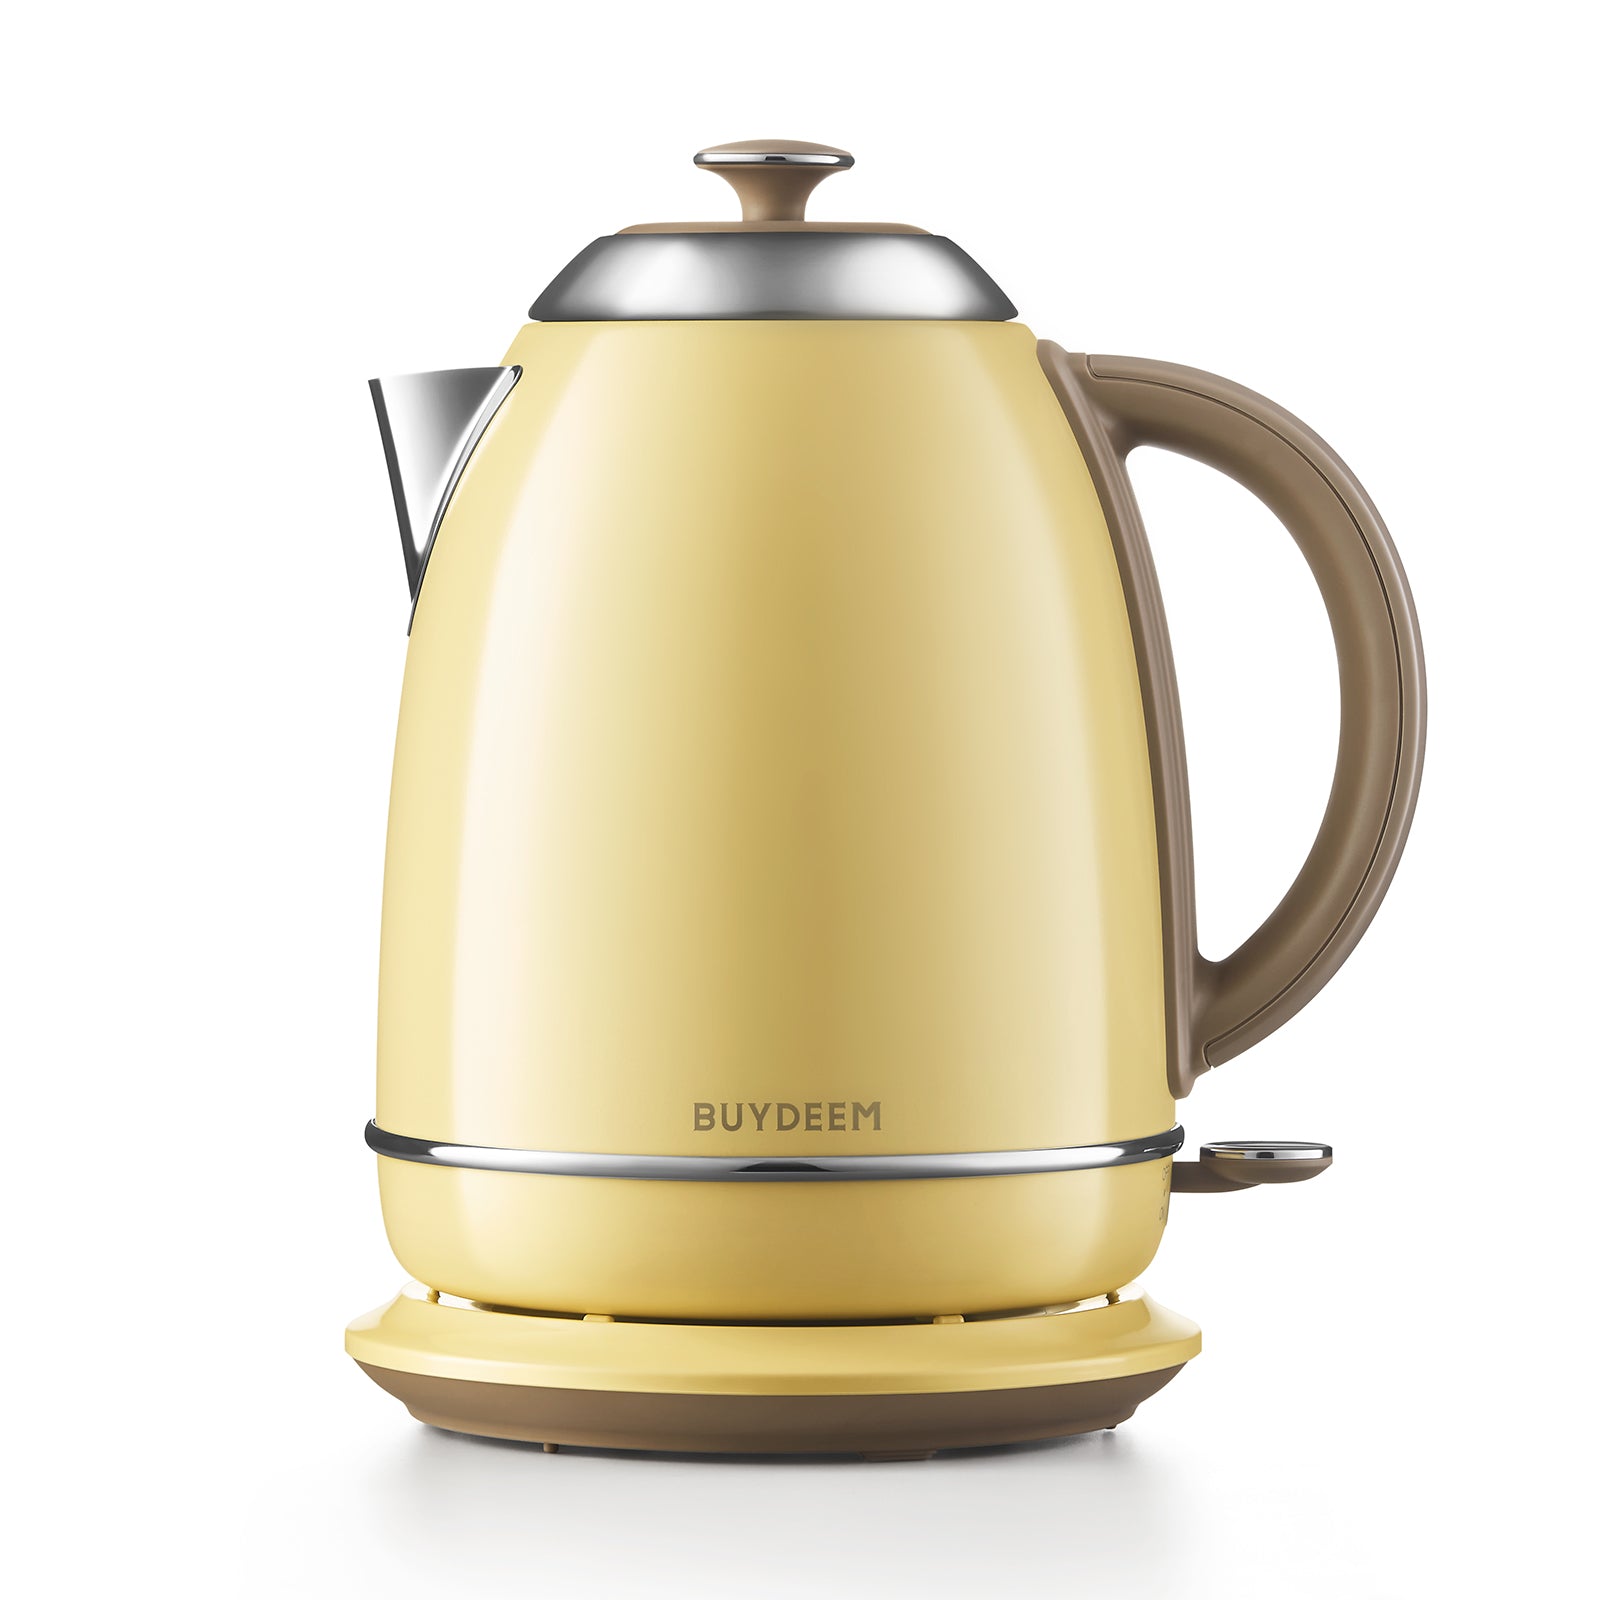 Overview and Demo of BUYDEEM Electric Tea Kettle 